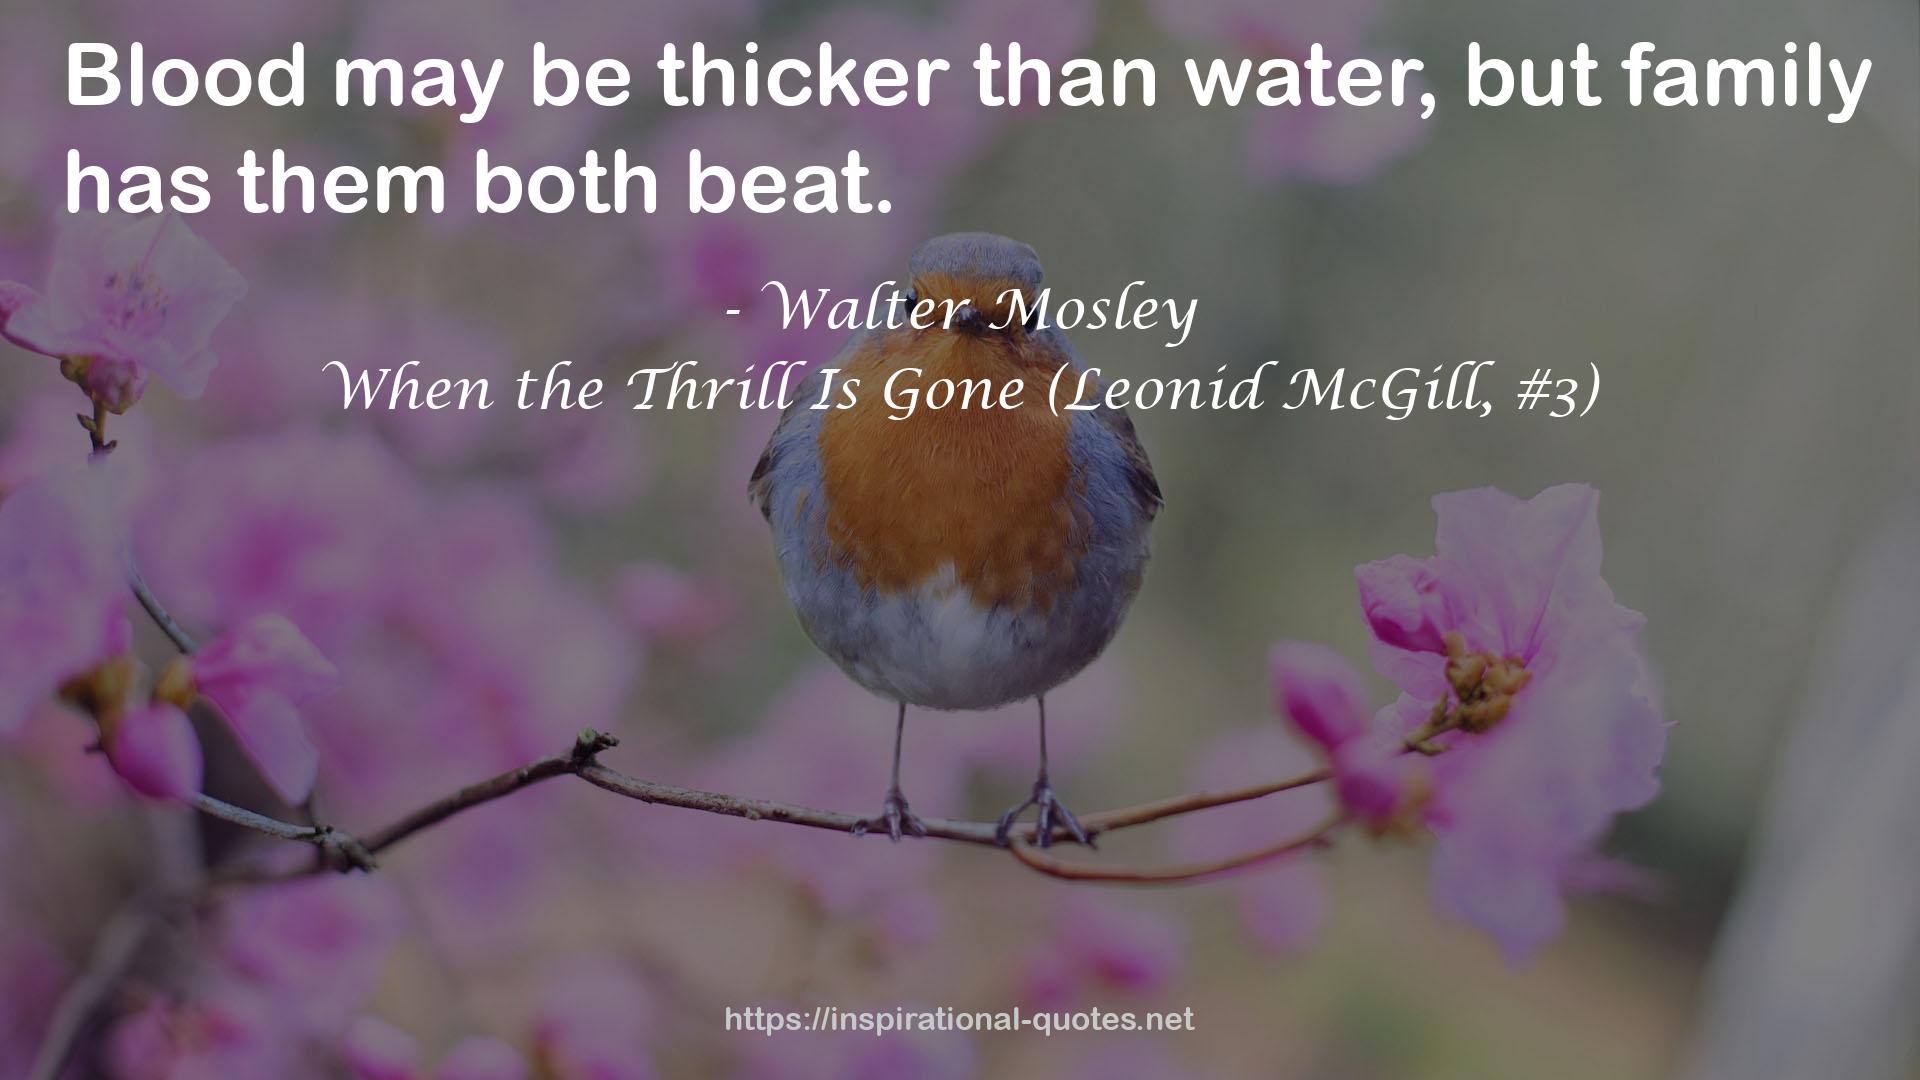 When the Thrill Is Gone (Leonid McGill, #3) QUOTES